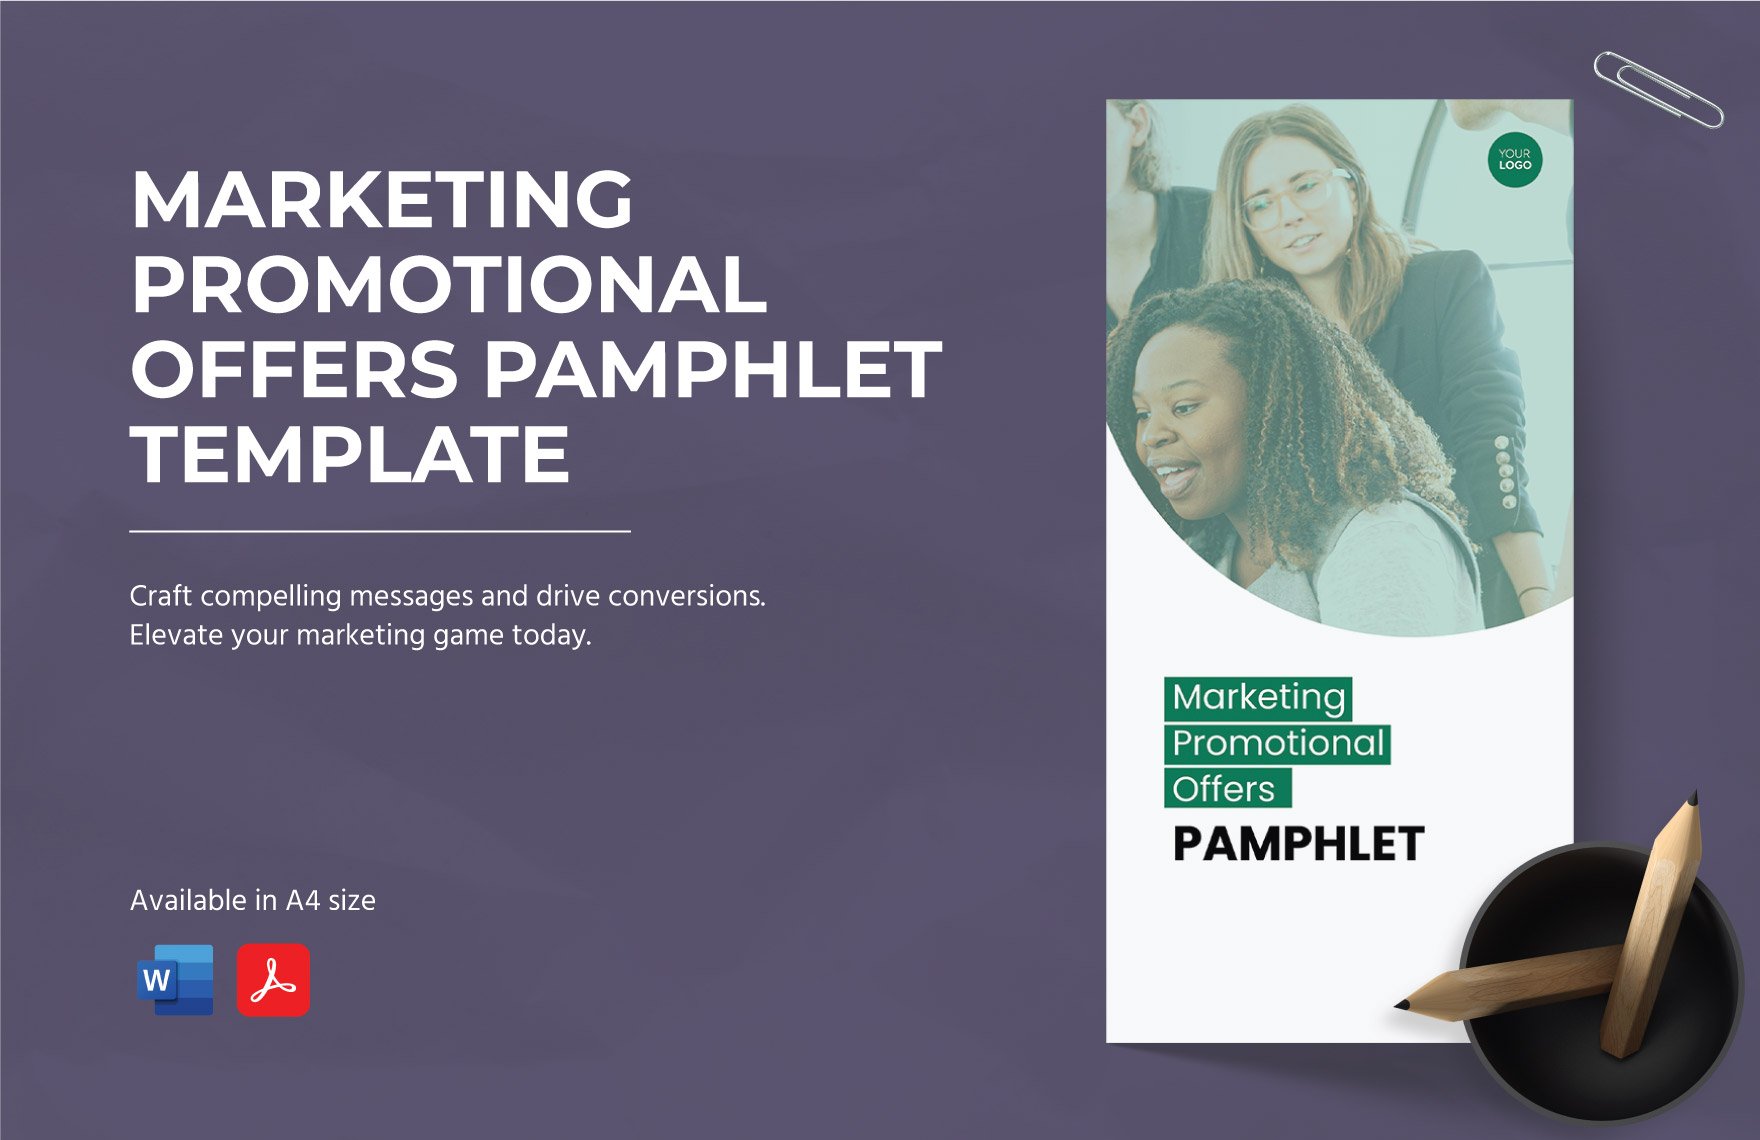 Marketing Promotional Offers Pamphlet Template